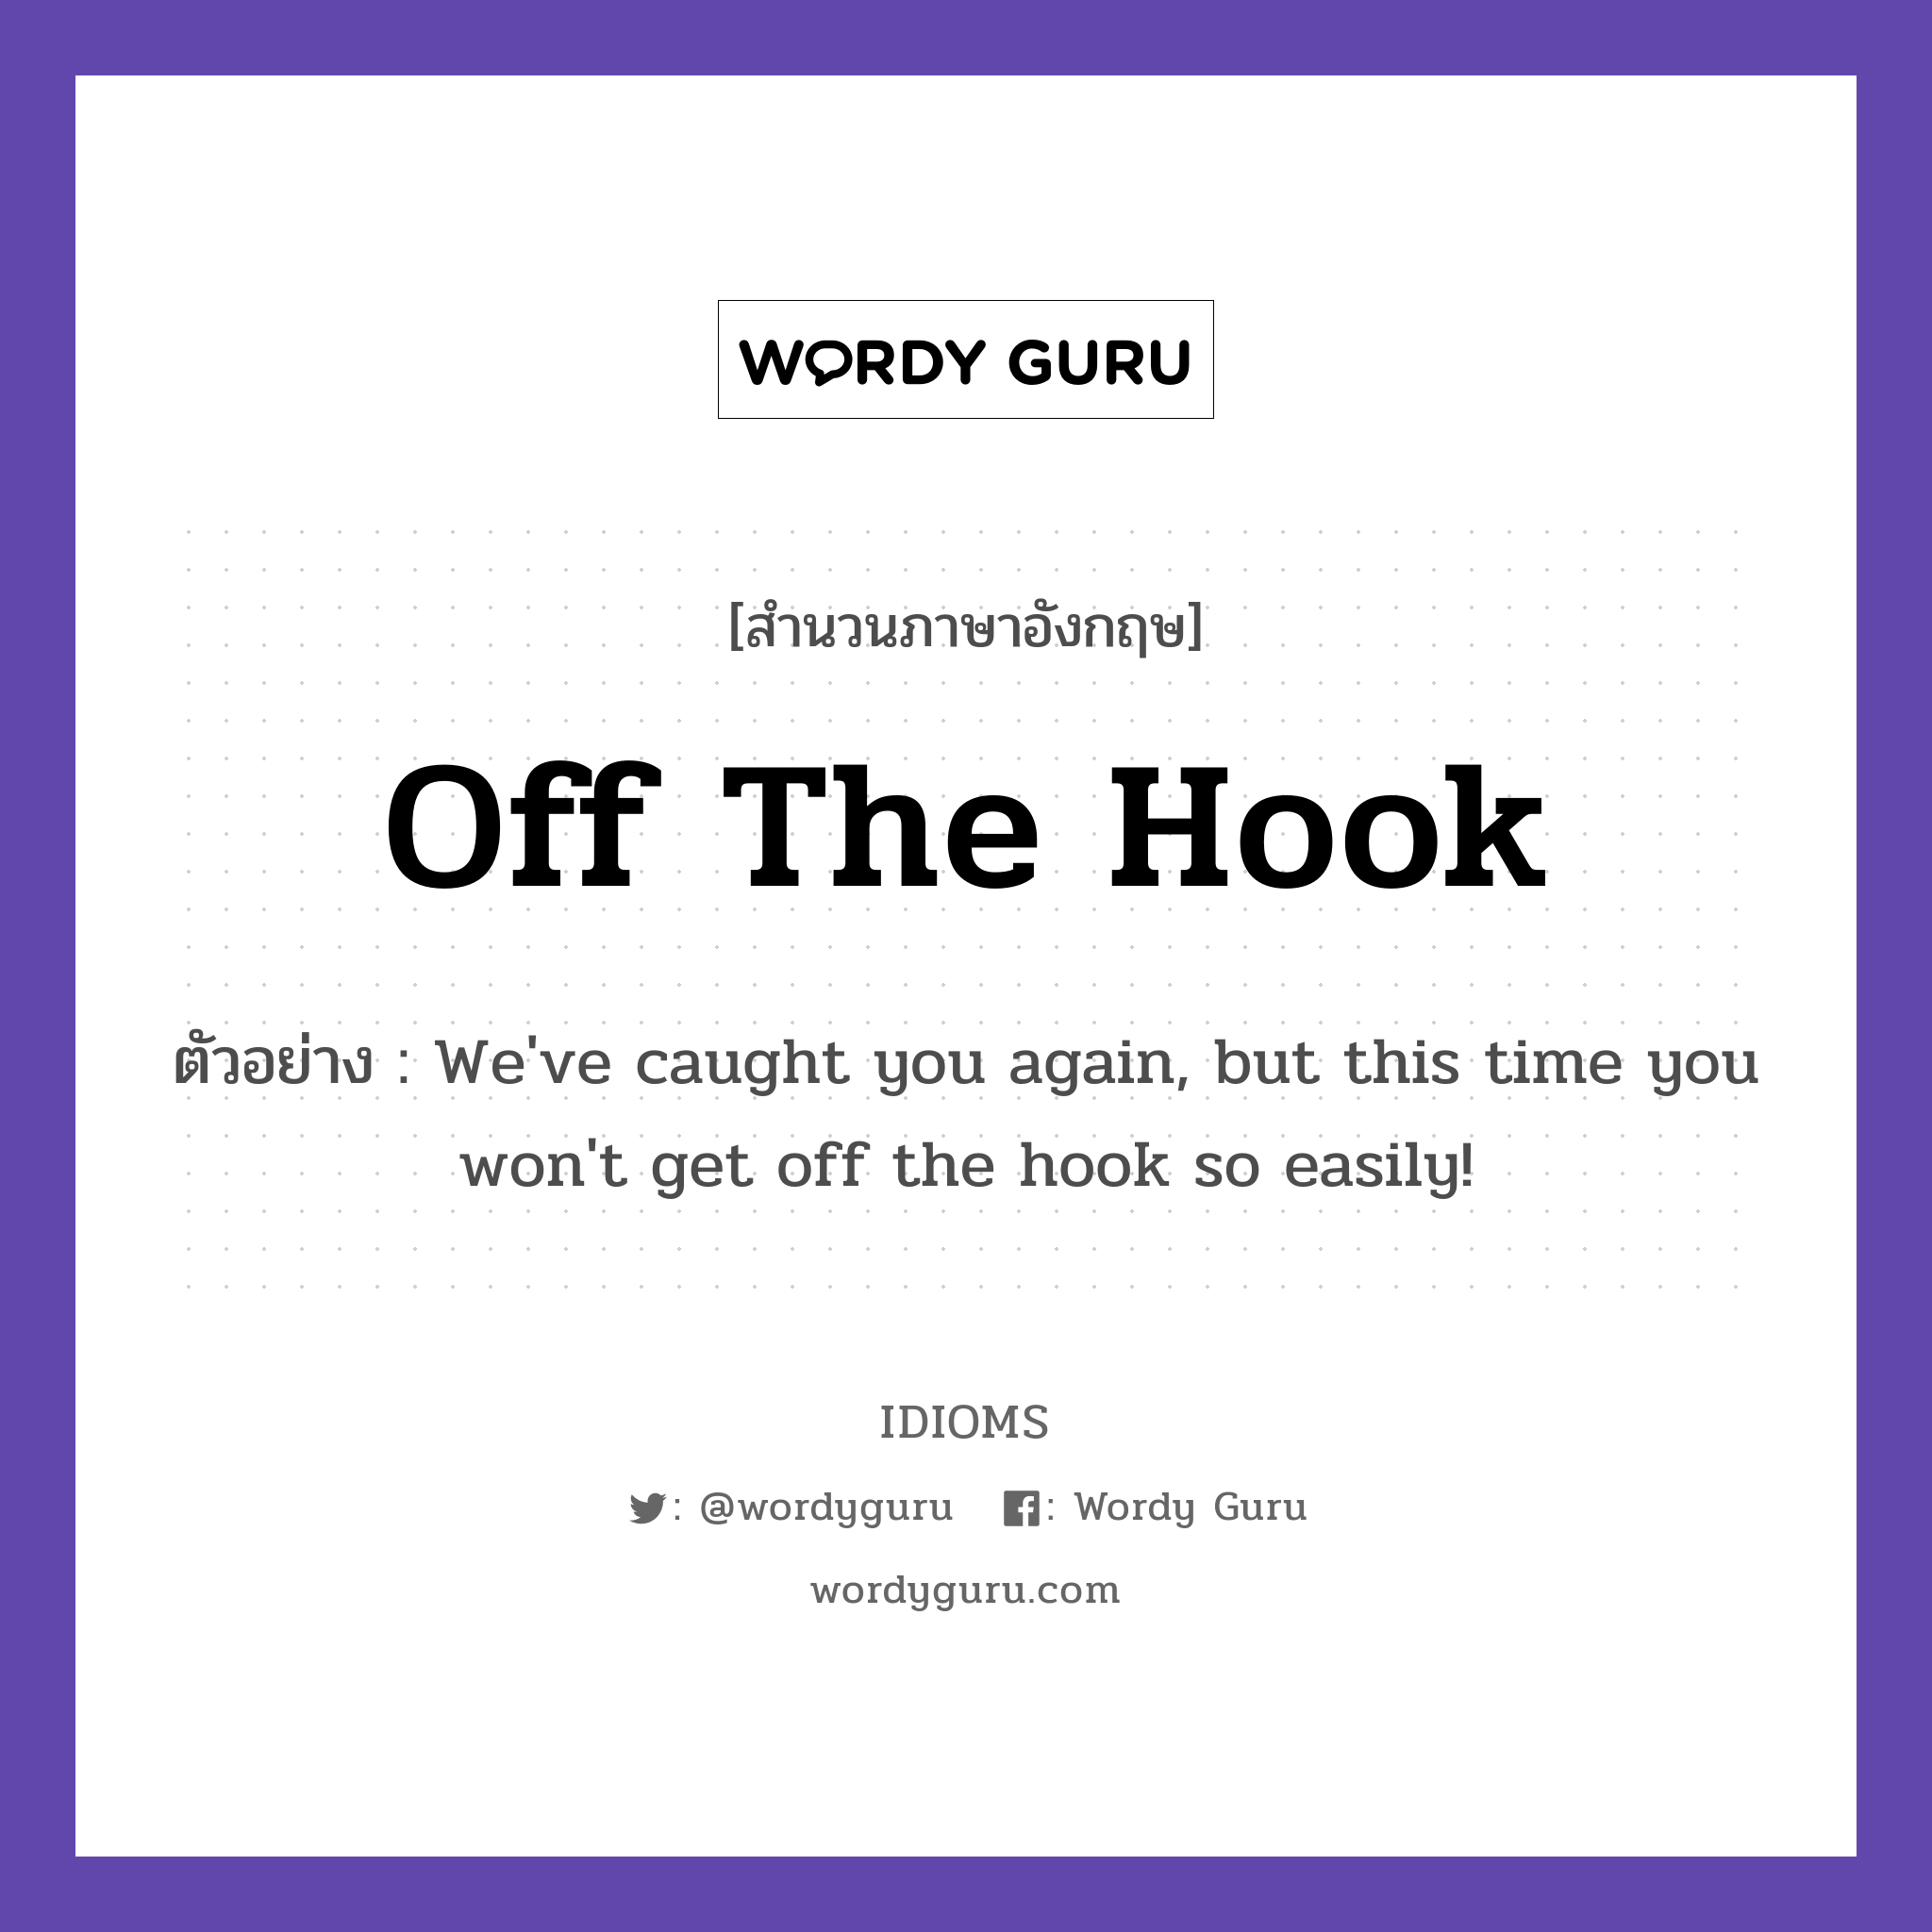 Off The Hook แปลว่า?, สำนวนภาษาอังกฤษ Off The Hook ตัวอย่าง We've caught you again, but this time you won't get off the hook so easily!